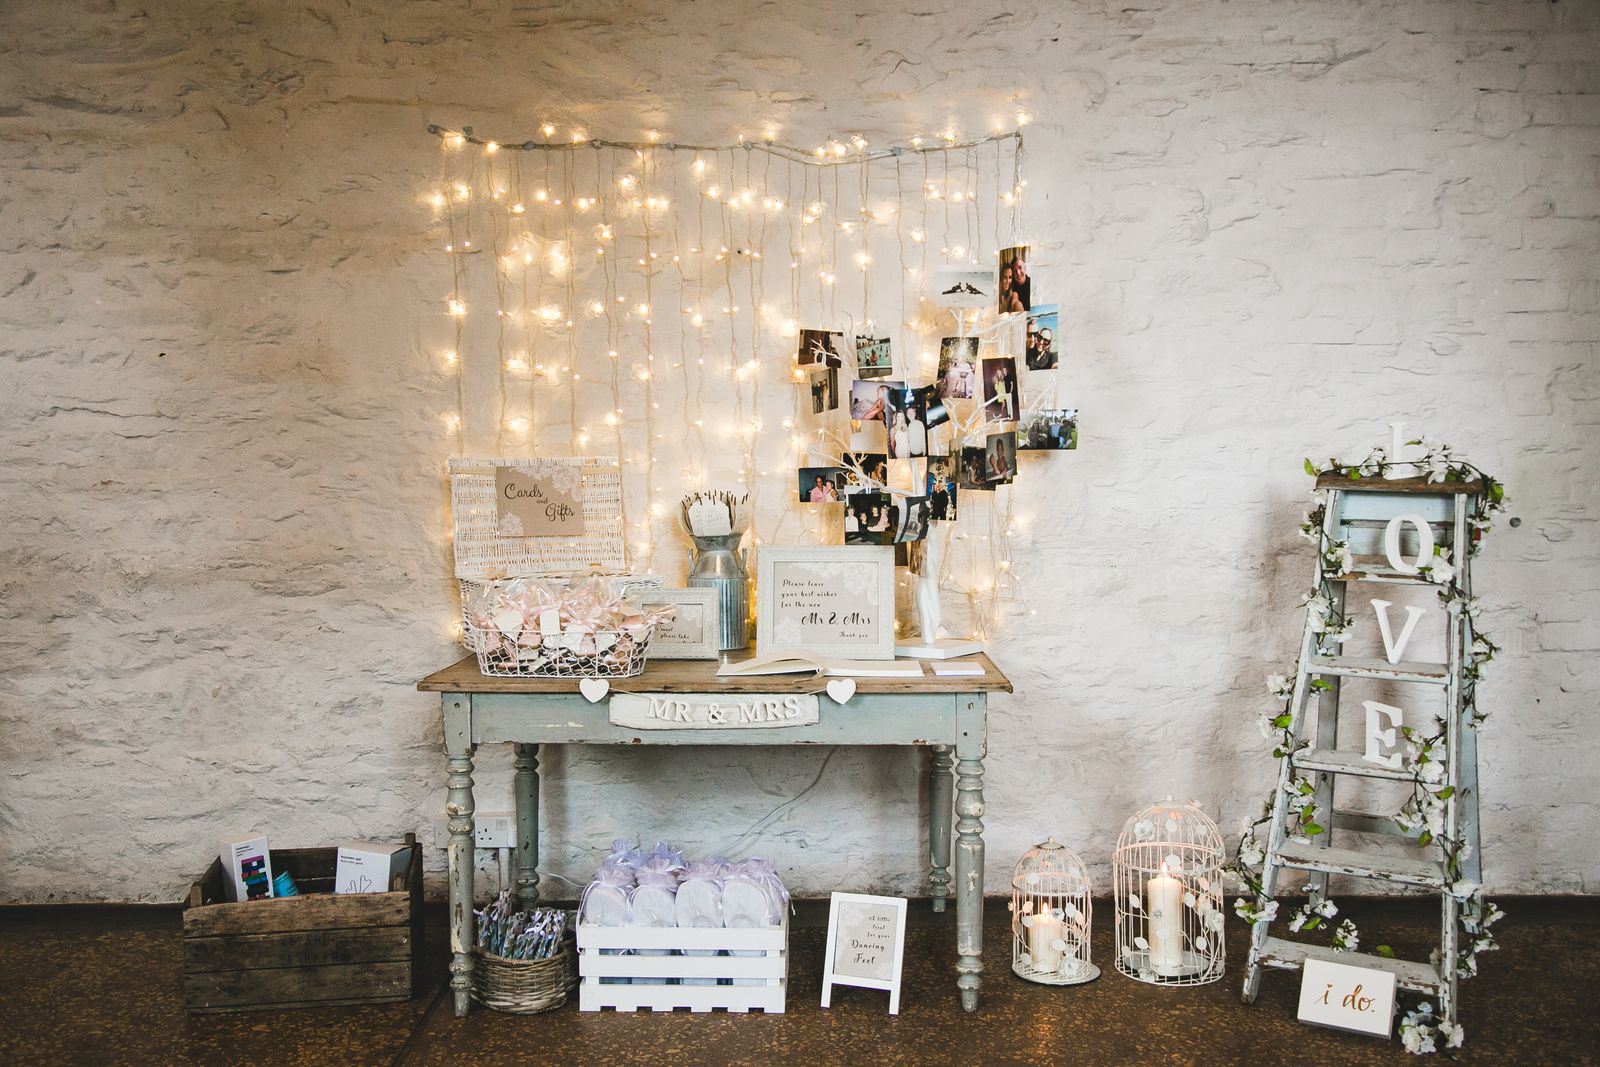 Cards table and glowing fairy lights in front of a rustic barn wall.